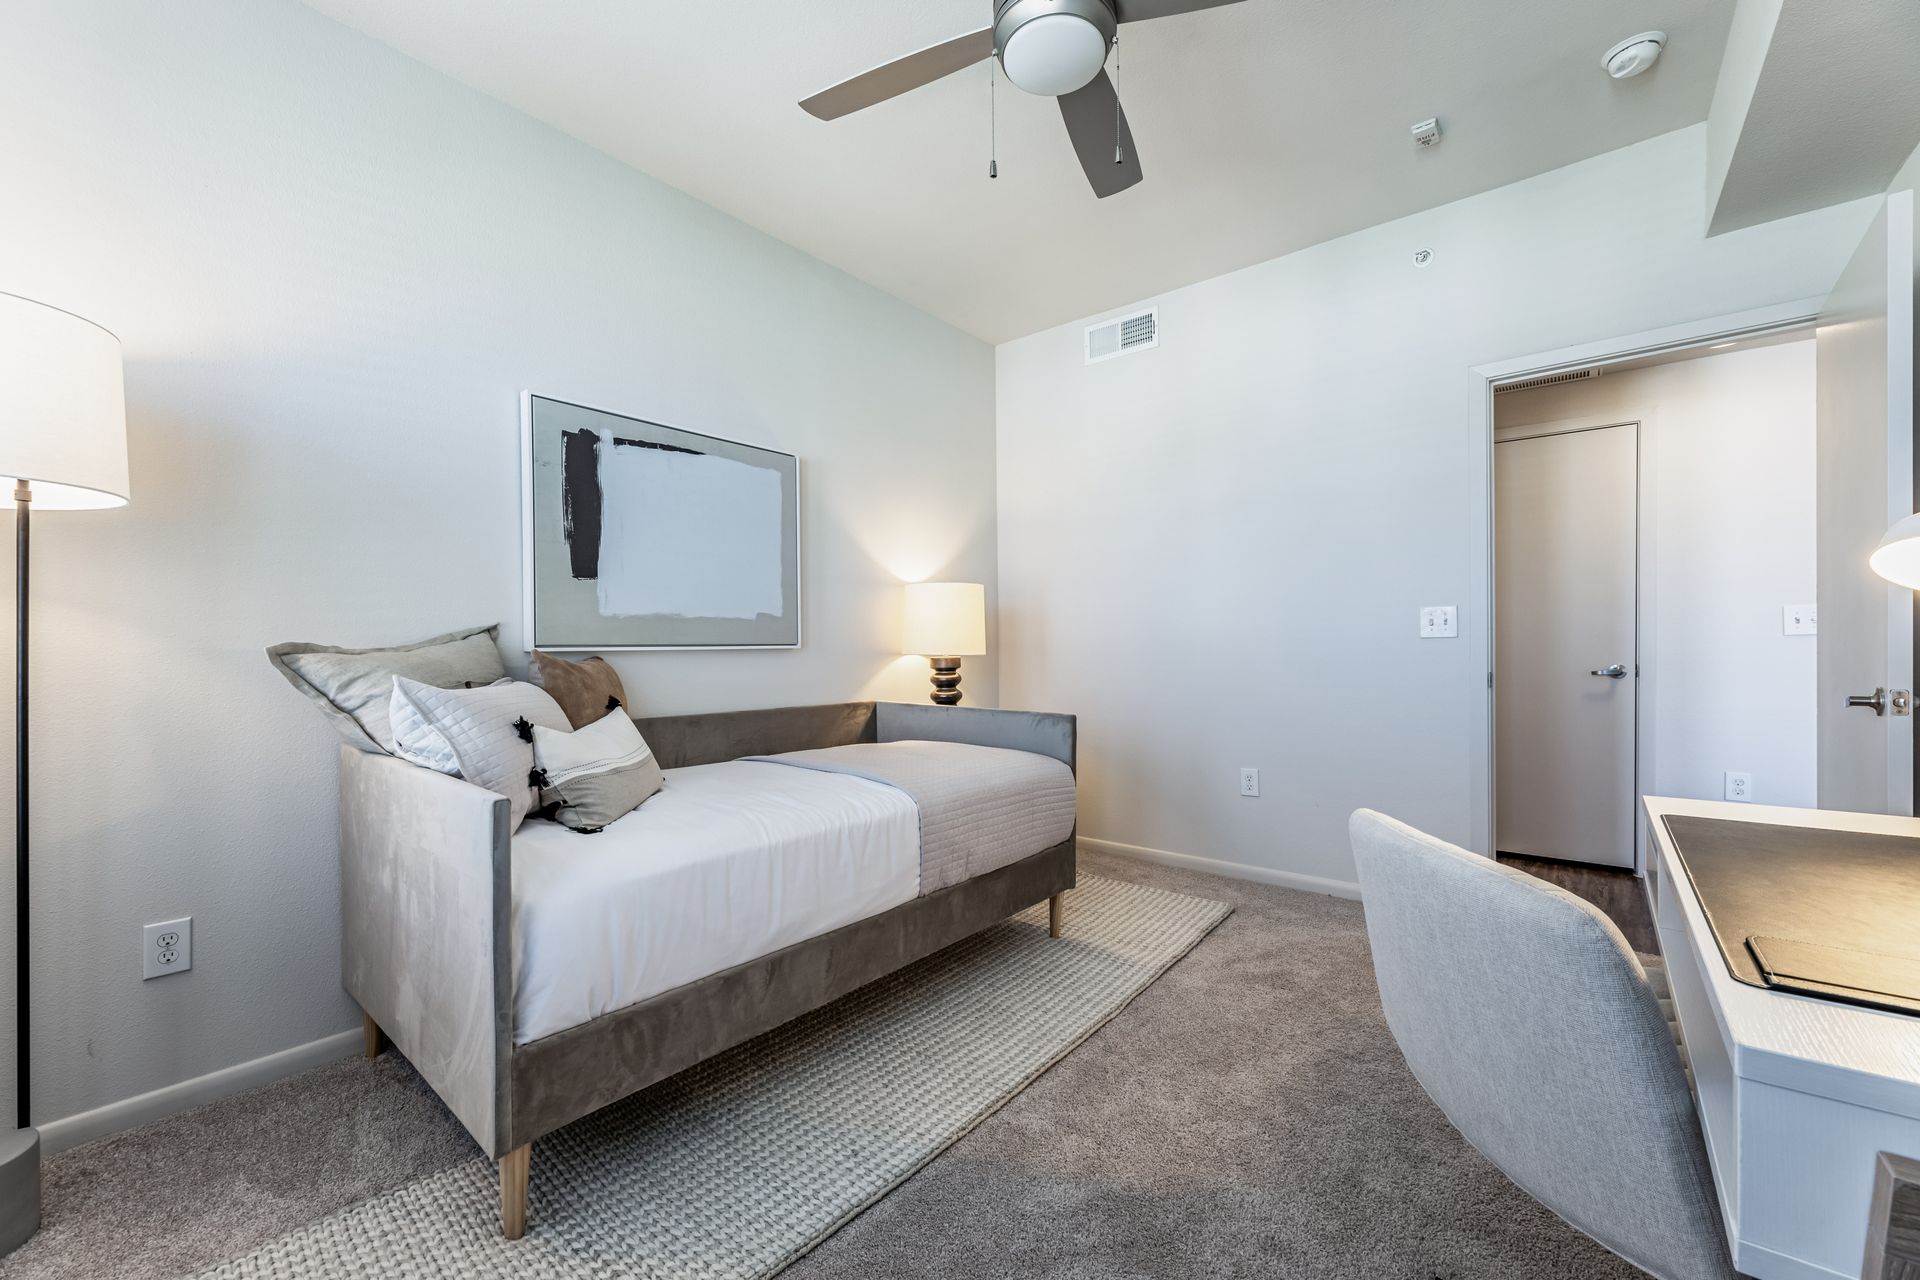 A bedroom with a bed, desk, chair, and ceiling fan at Parkside at Craig Ranch.